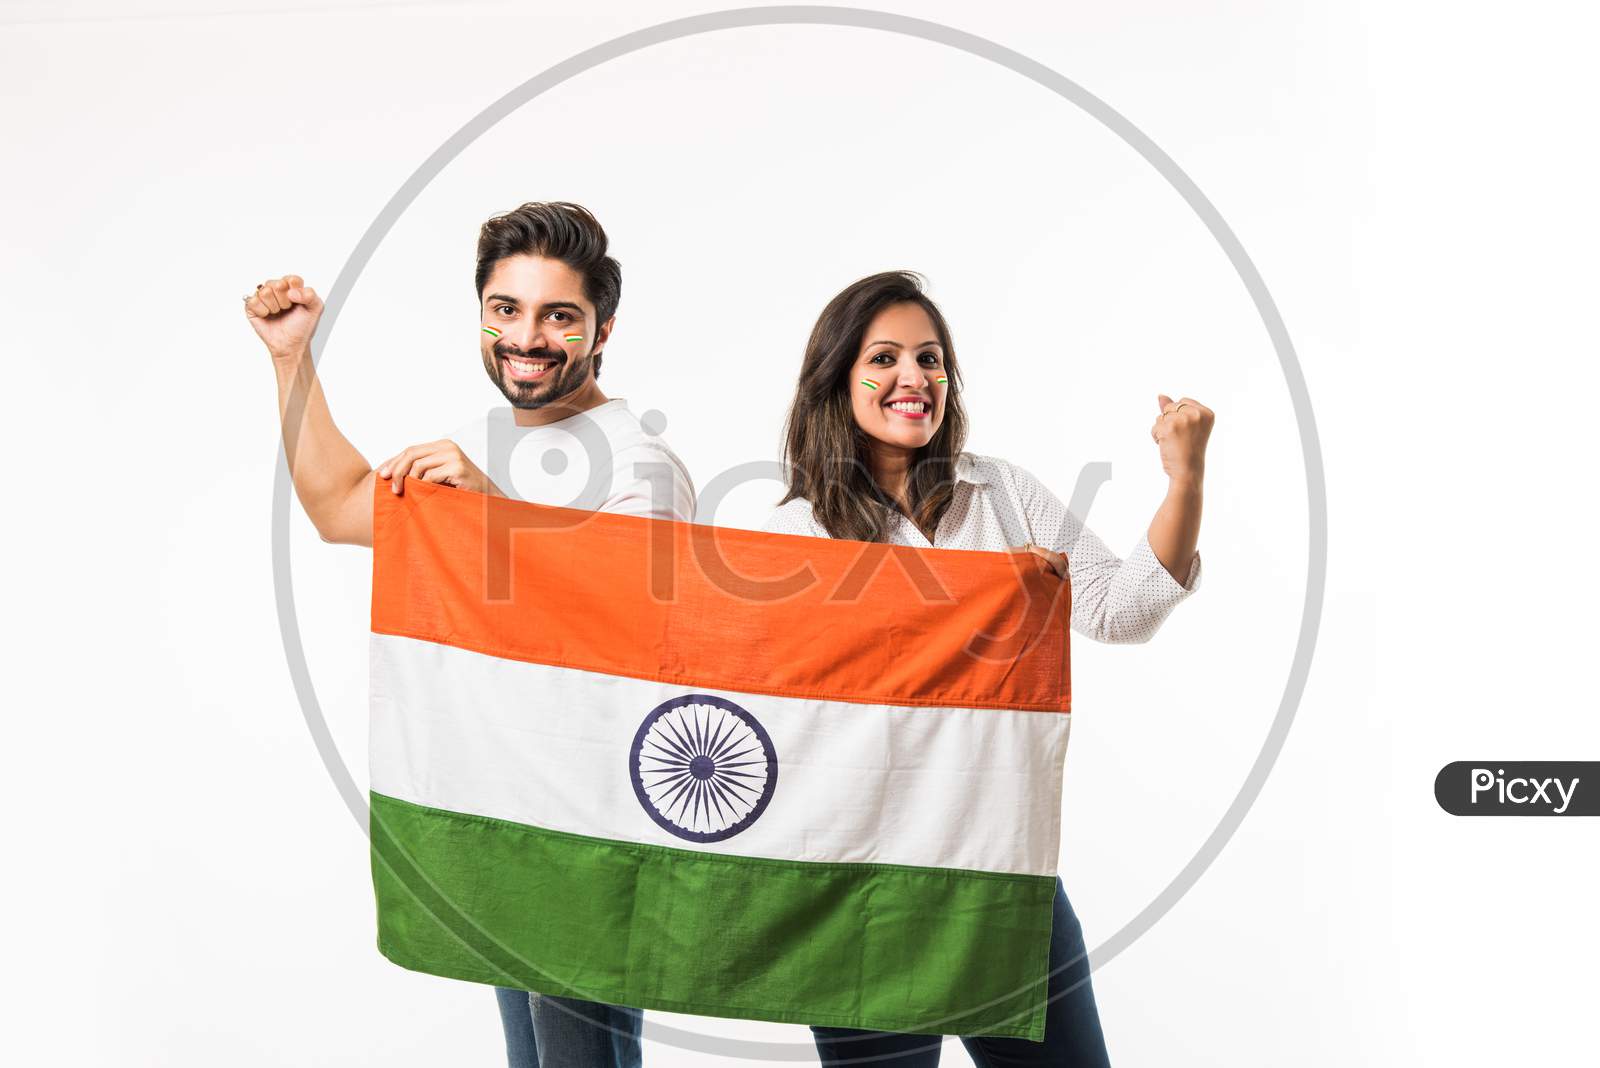 Young Couple holding Indian Flag on Independence or republic day, standing isolated over white background. selective focus